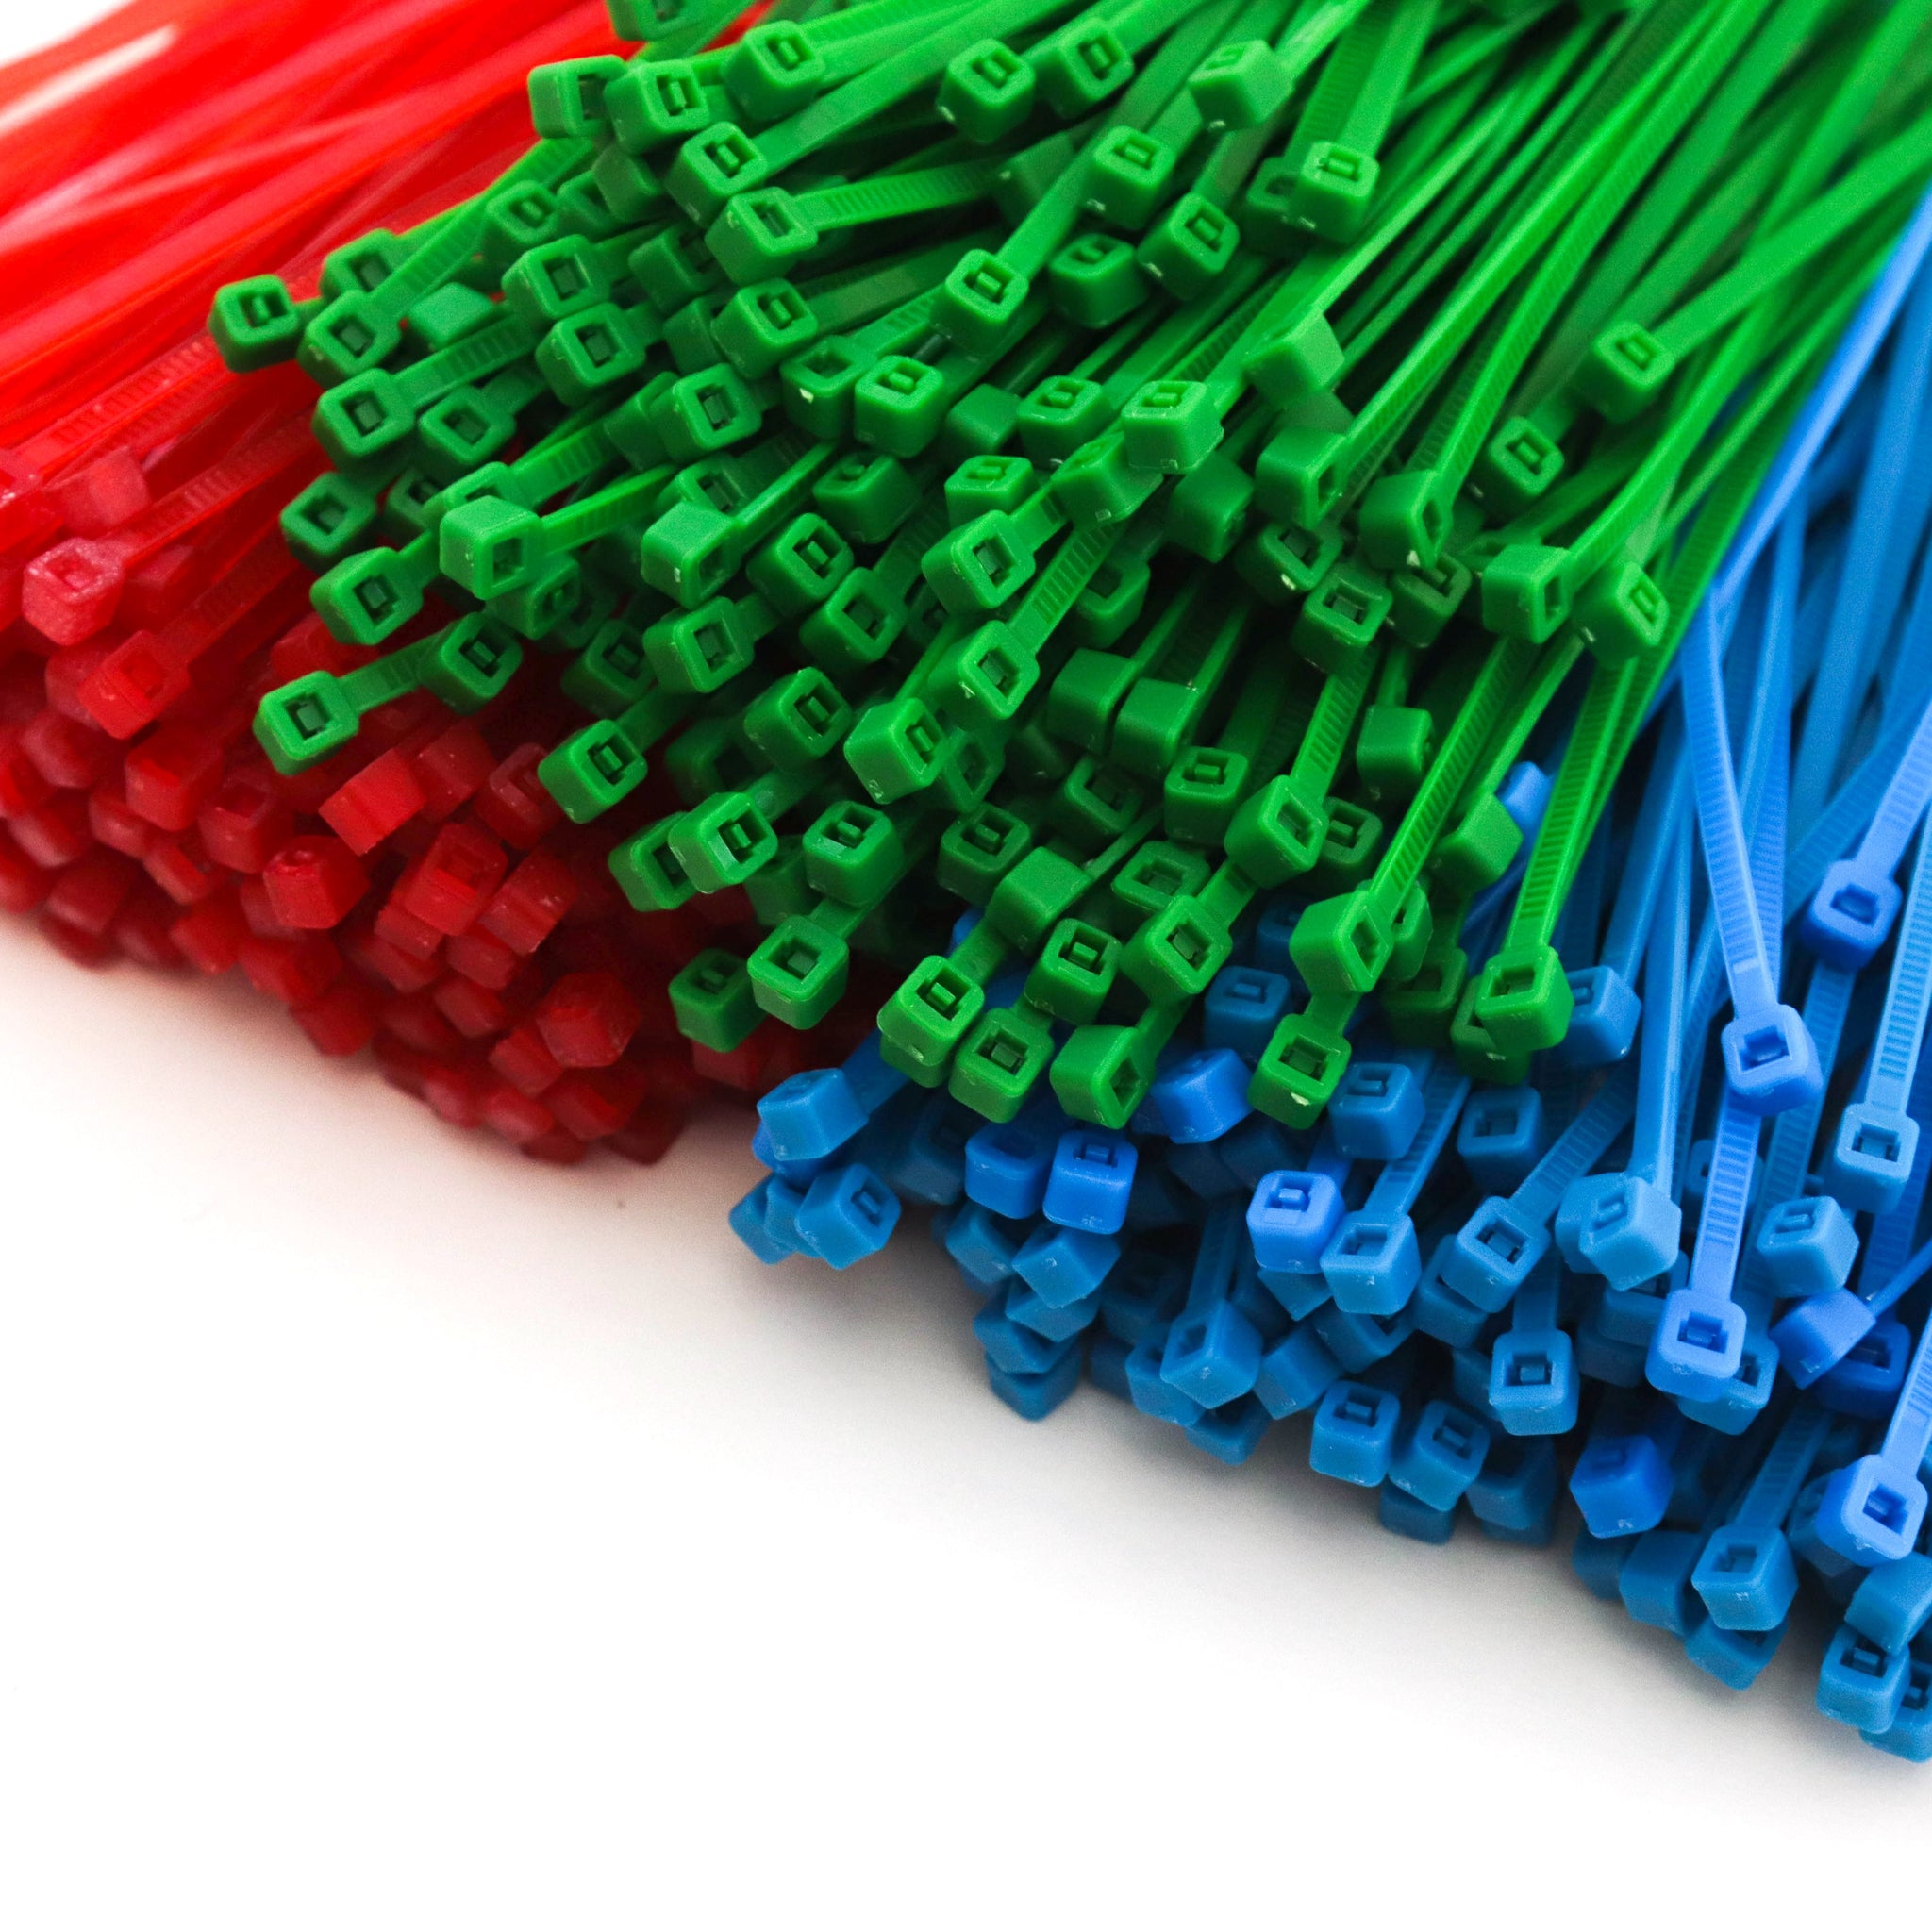 3000 Heavy Duty 4 Inch 18 Pound Color Cable Ties Nylon Wraps 3 Colors (1000 Red, 1000 Green, 1000 Blue) Deluxe Bulk Combo Kit